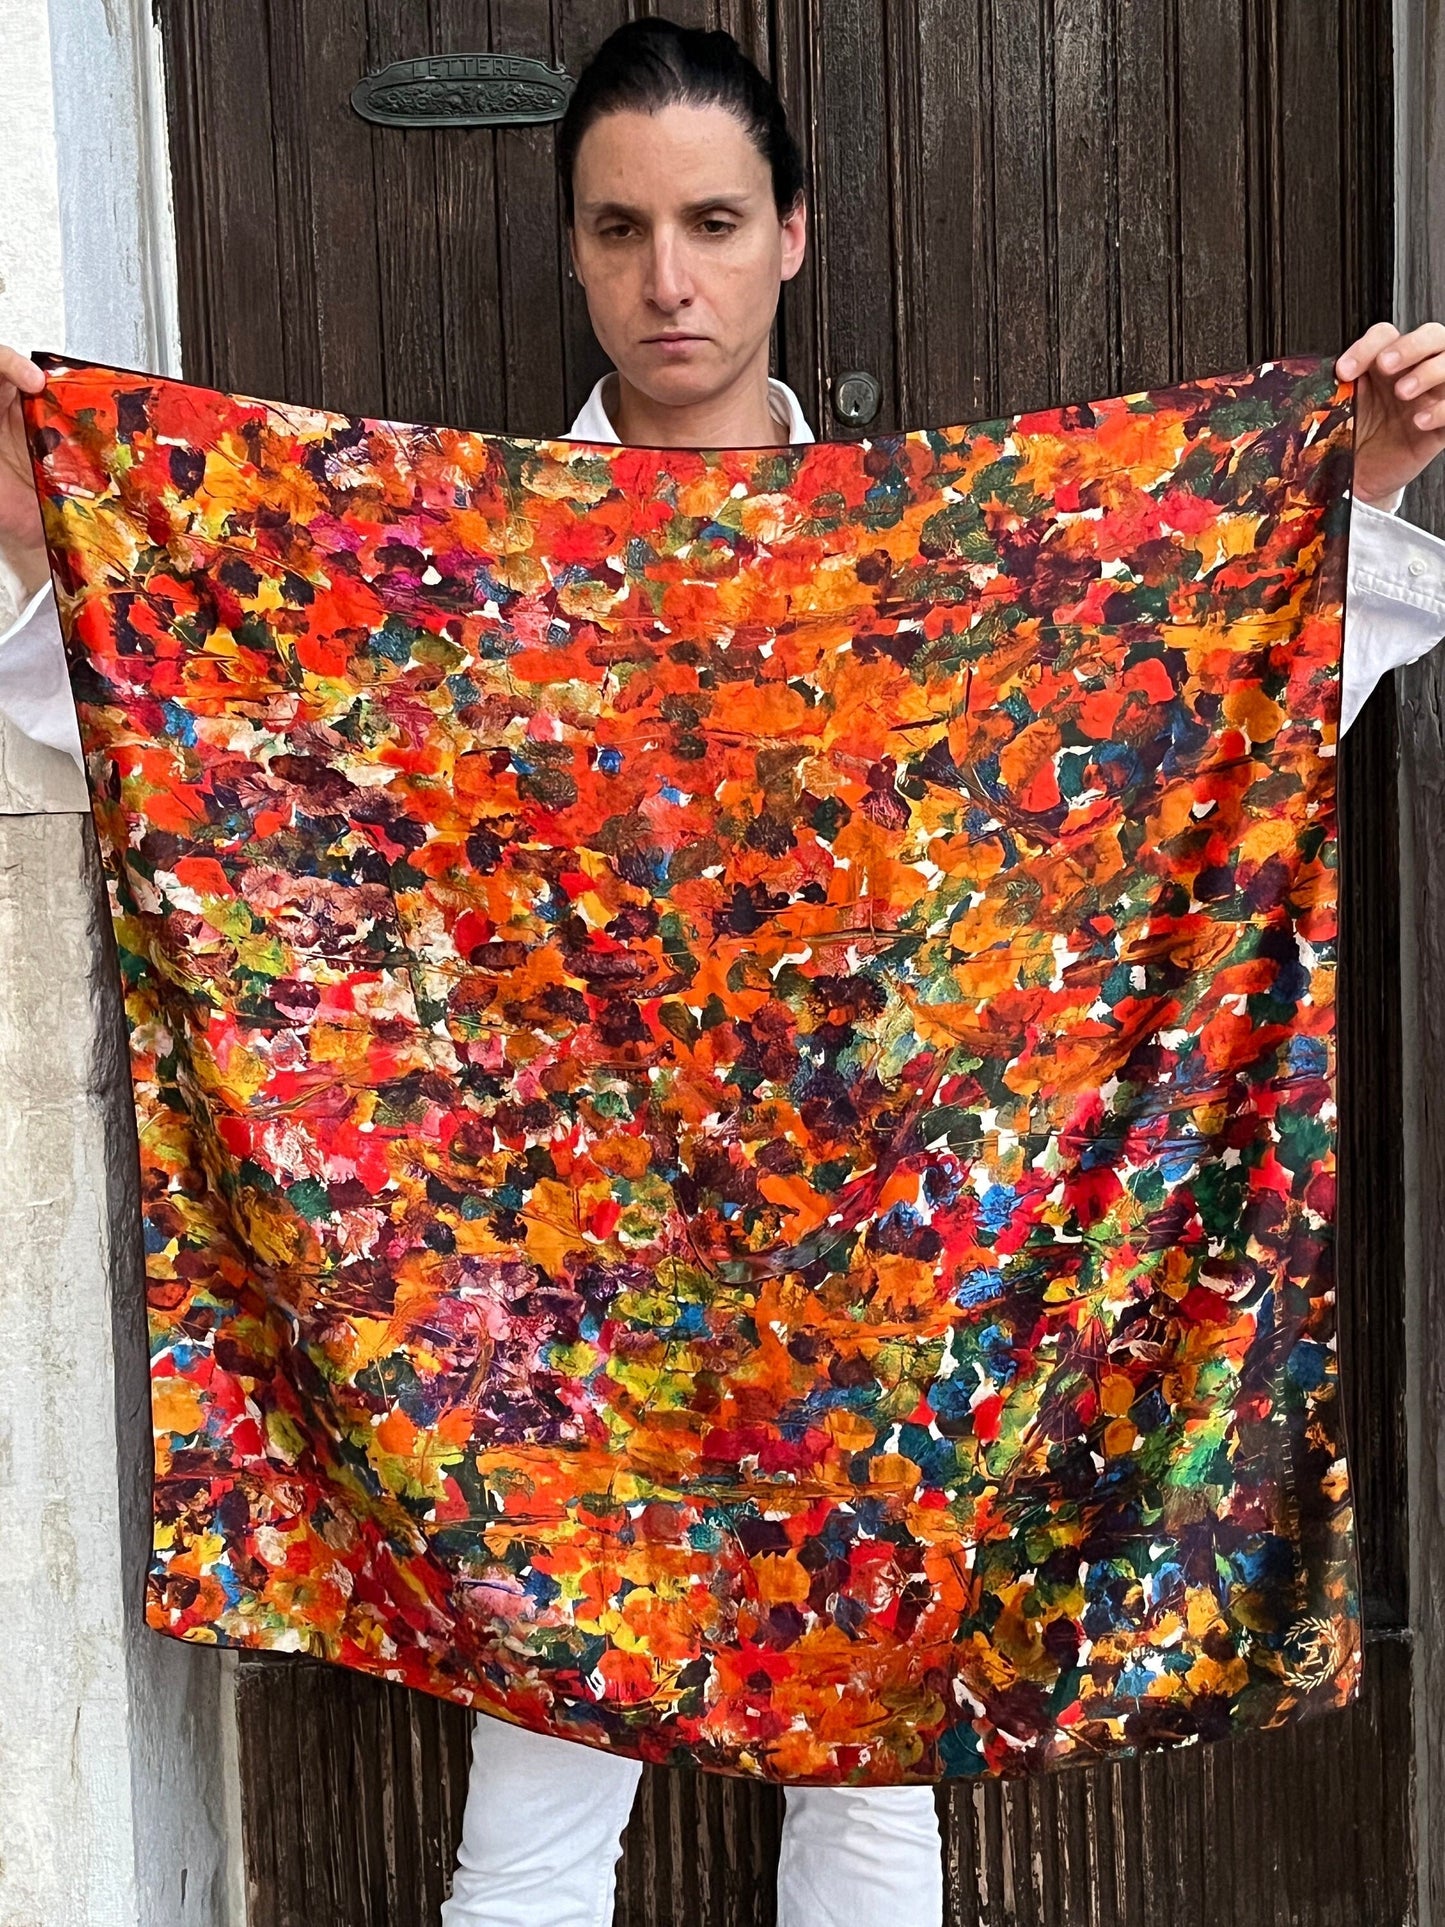 Hand made 100% mulberry silk scarves Designed by “Bruce Mishell” “ Unity” 35” x 35” inches